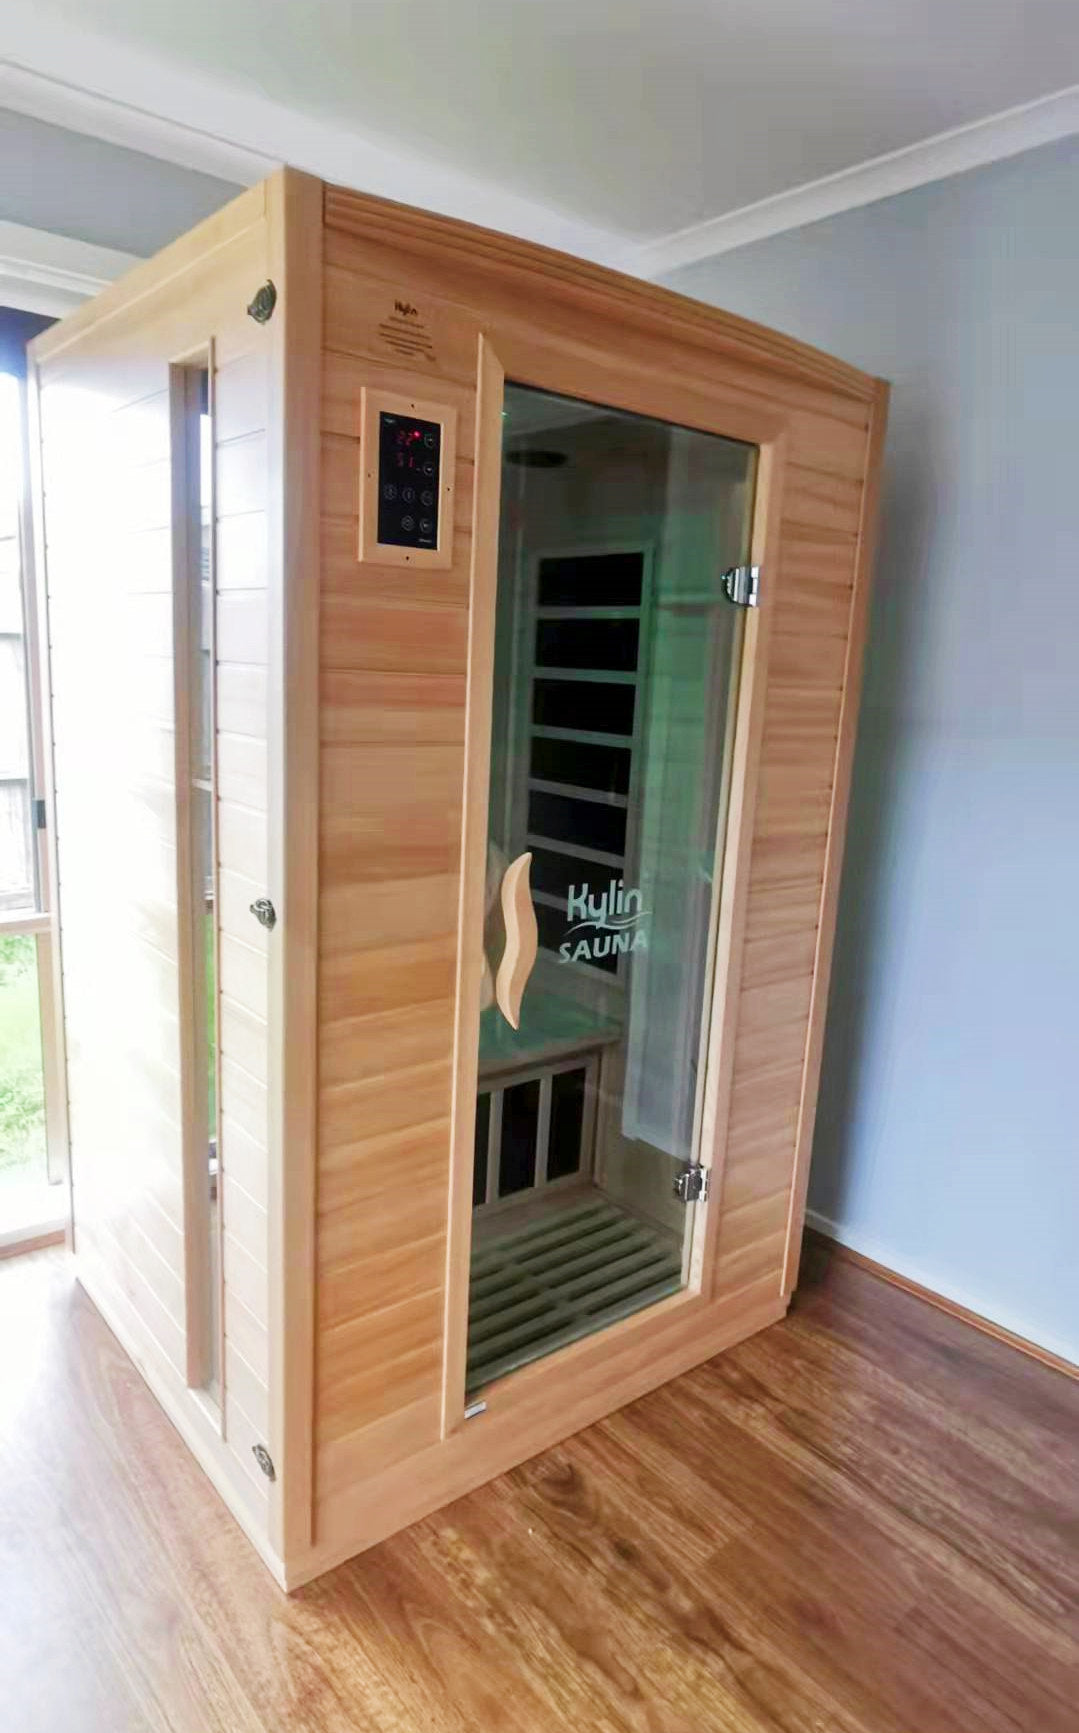 KYLIN KY-2A5 Infrared Sauna 2 Person Low EMF Carbon in room